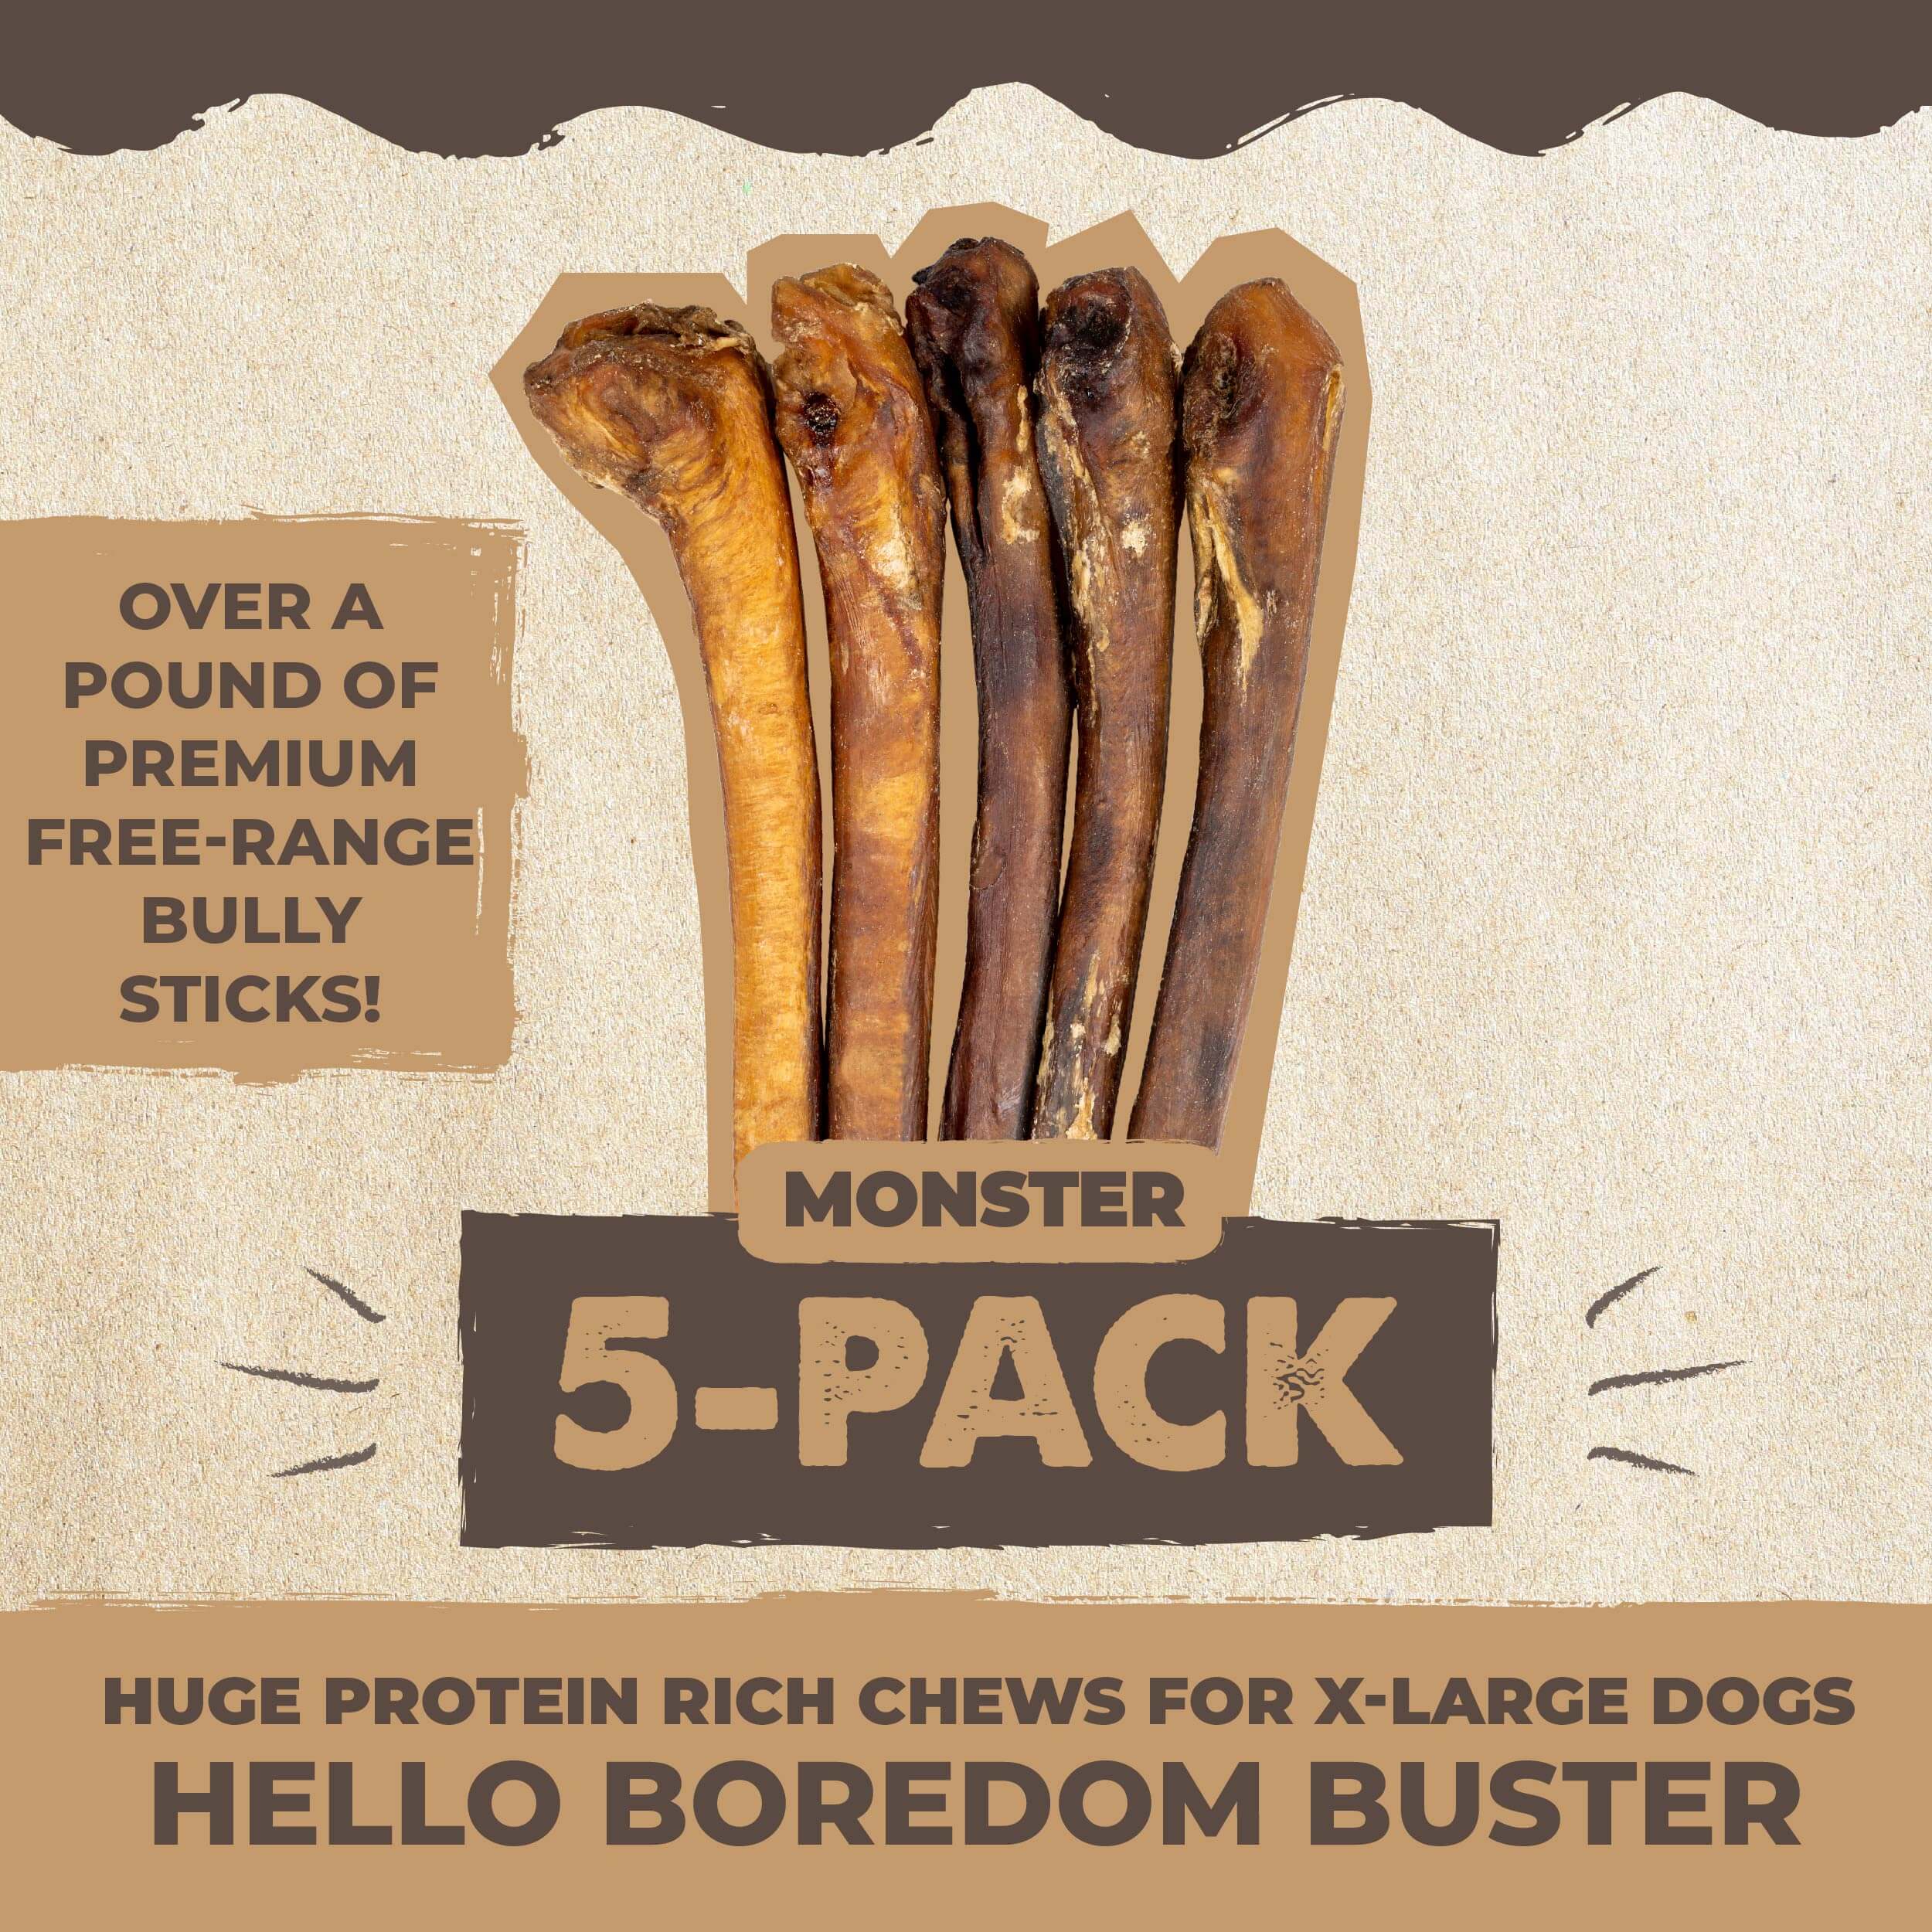 Boredom Buster Chew Value Pack